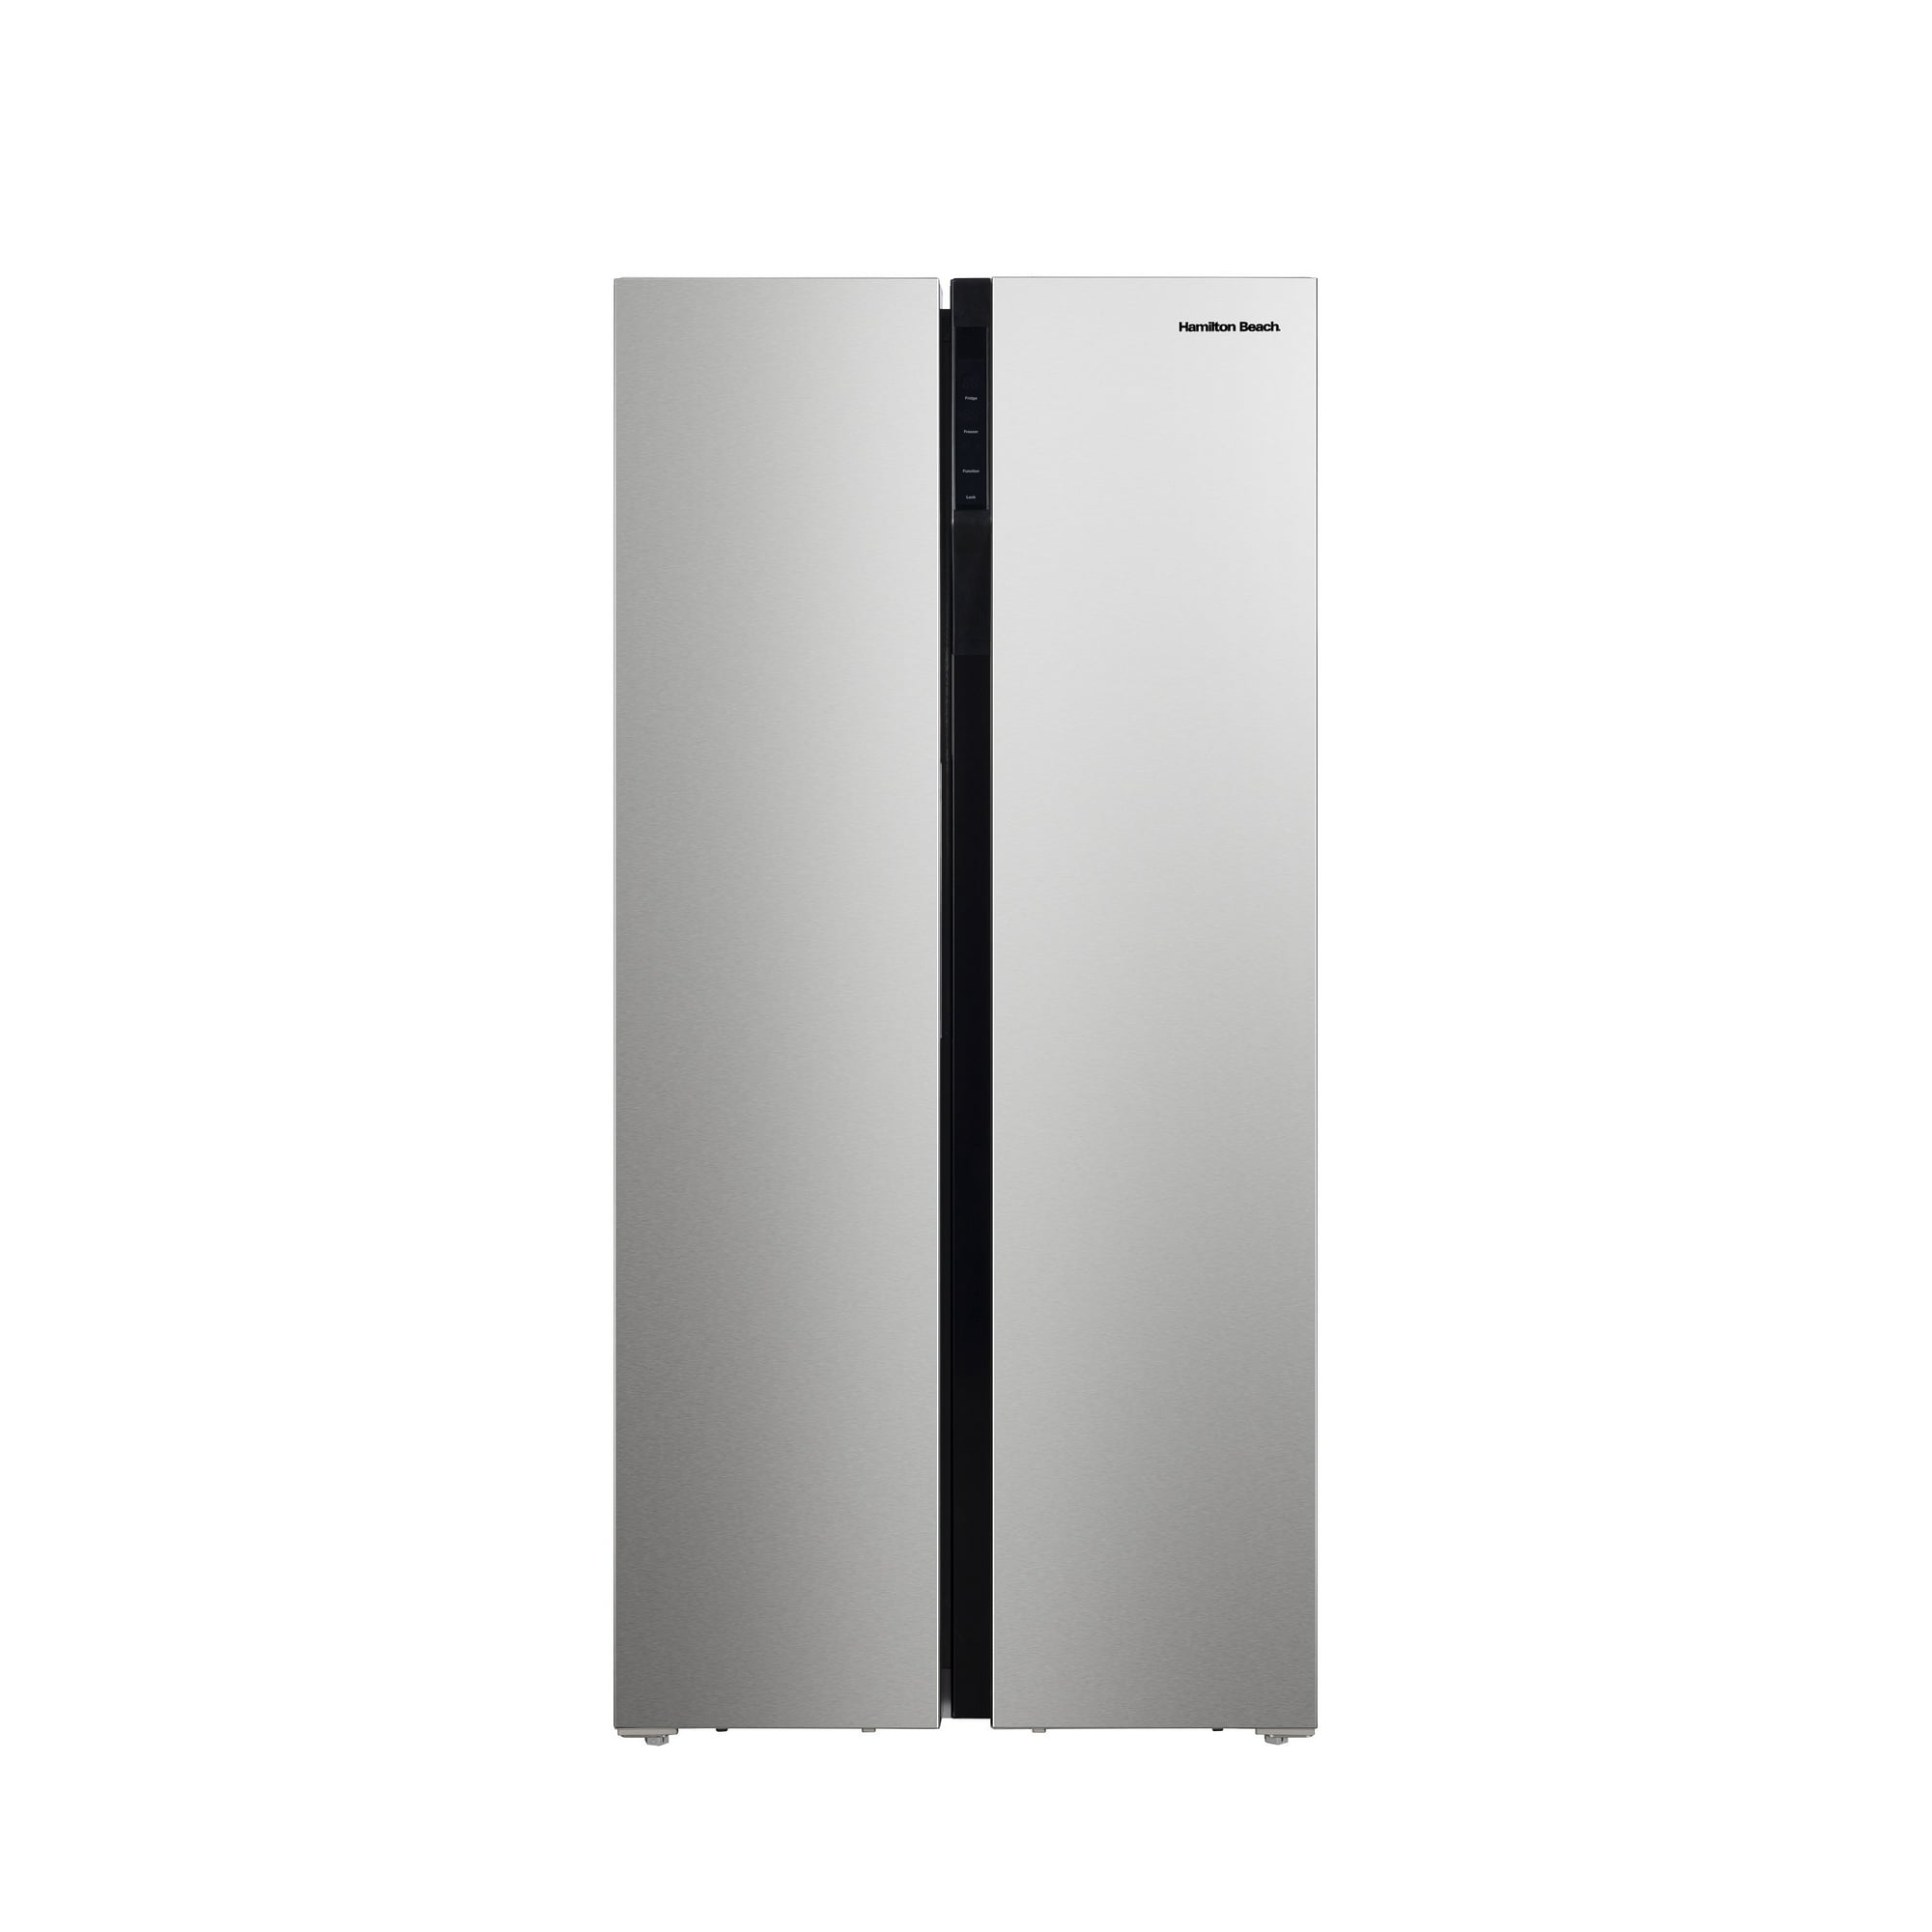 20.6 cu. Ft. Hamilton Beach Side-by-side Stainless Refrigerator $874 incl. S&H